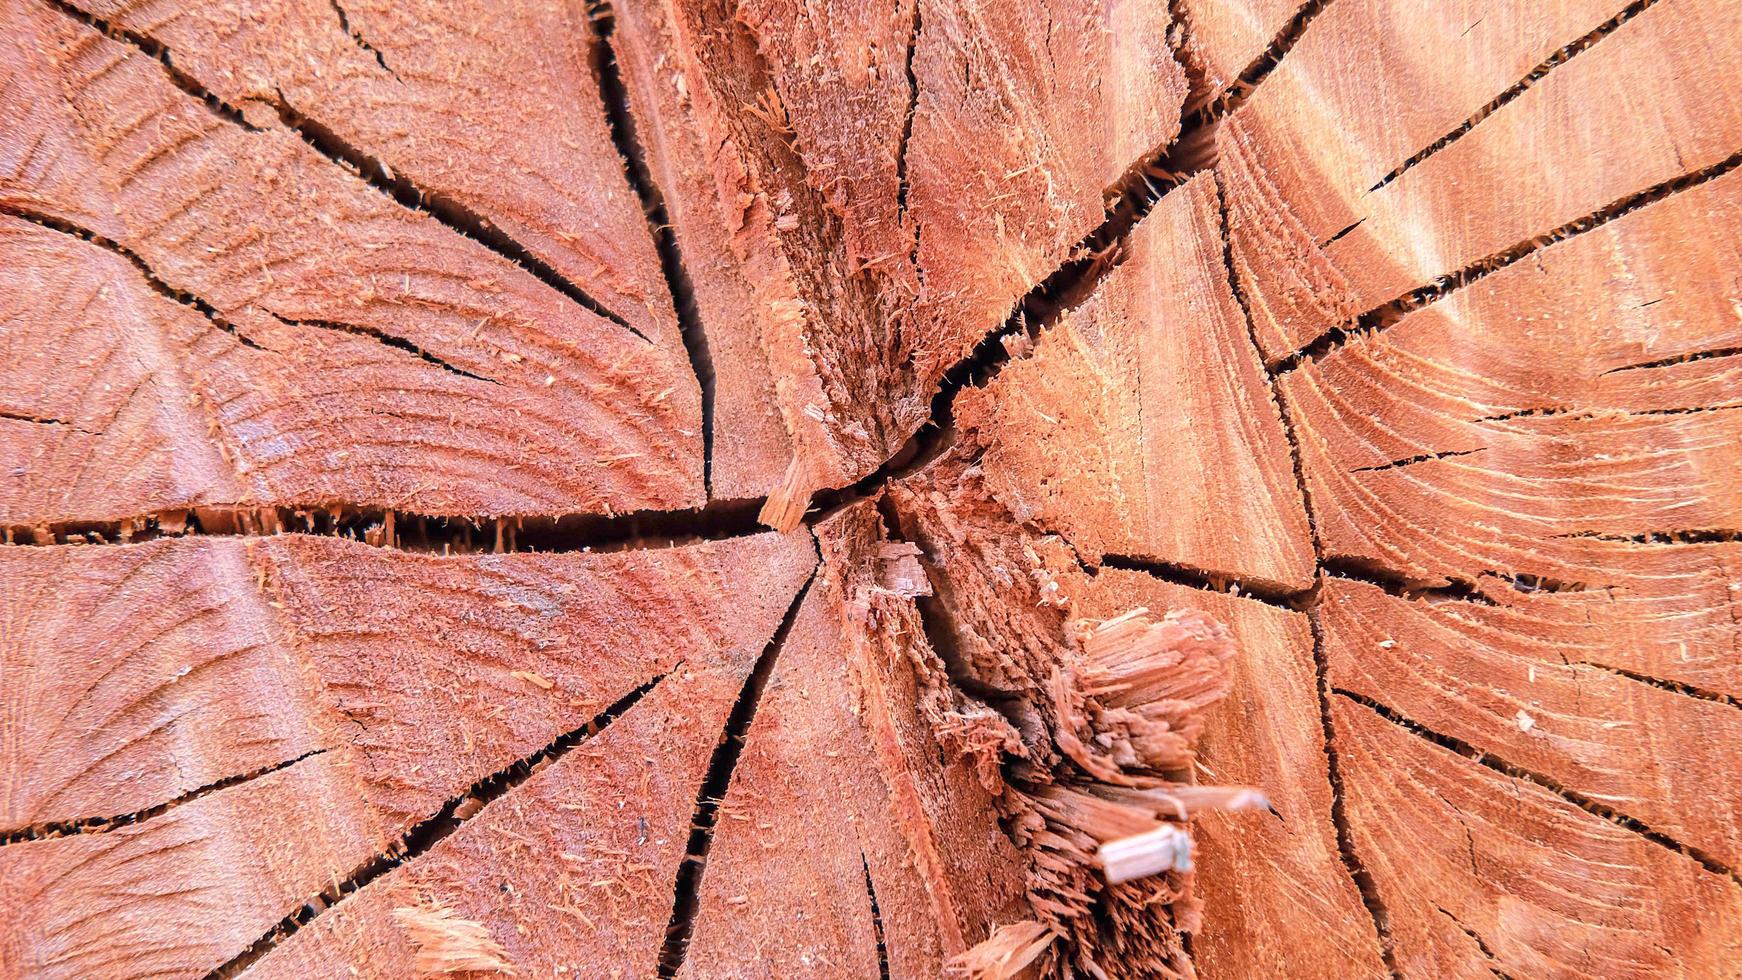 The background of the cut wood reveals the pattern and details or texture of the wood at the core. wood cutting background photo